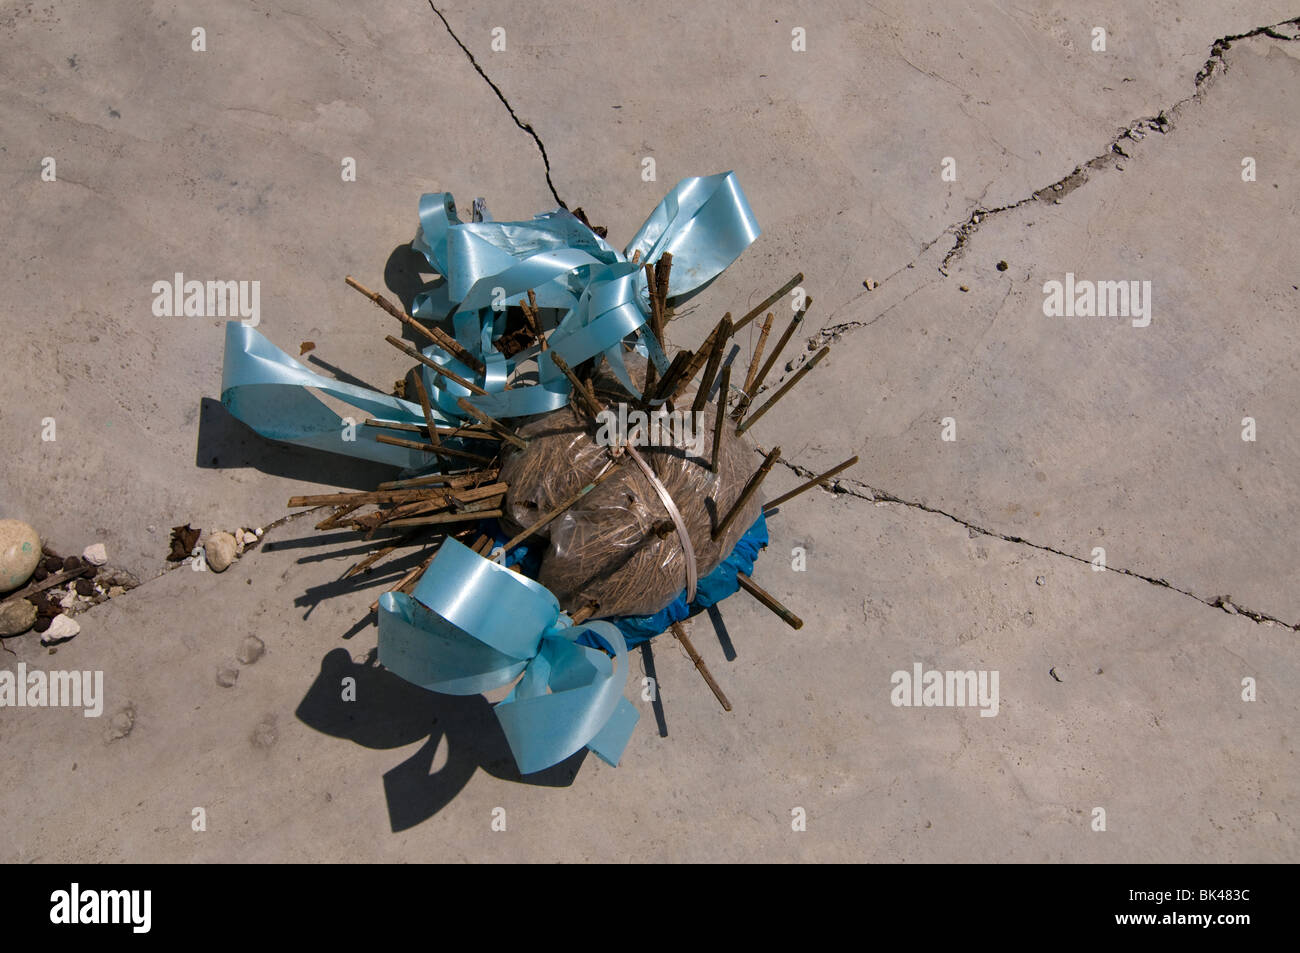 A voodoo ceremonial object is seen on a cracked gravestone in Haiti Stock Photo